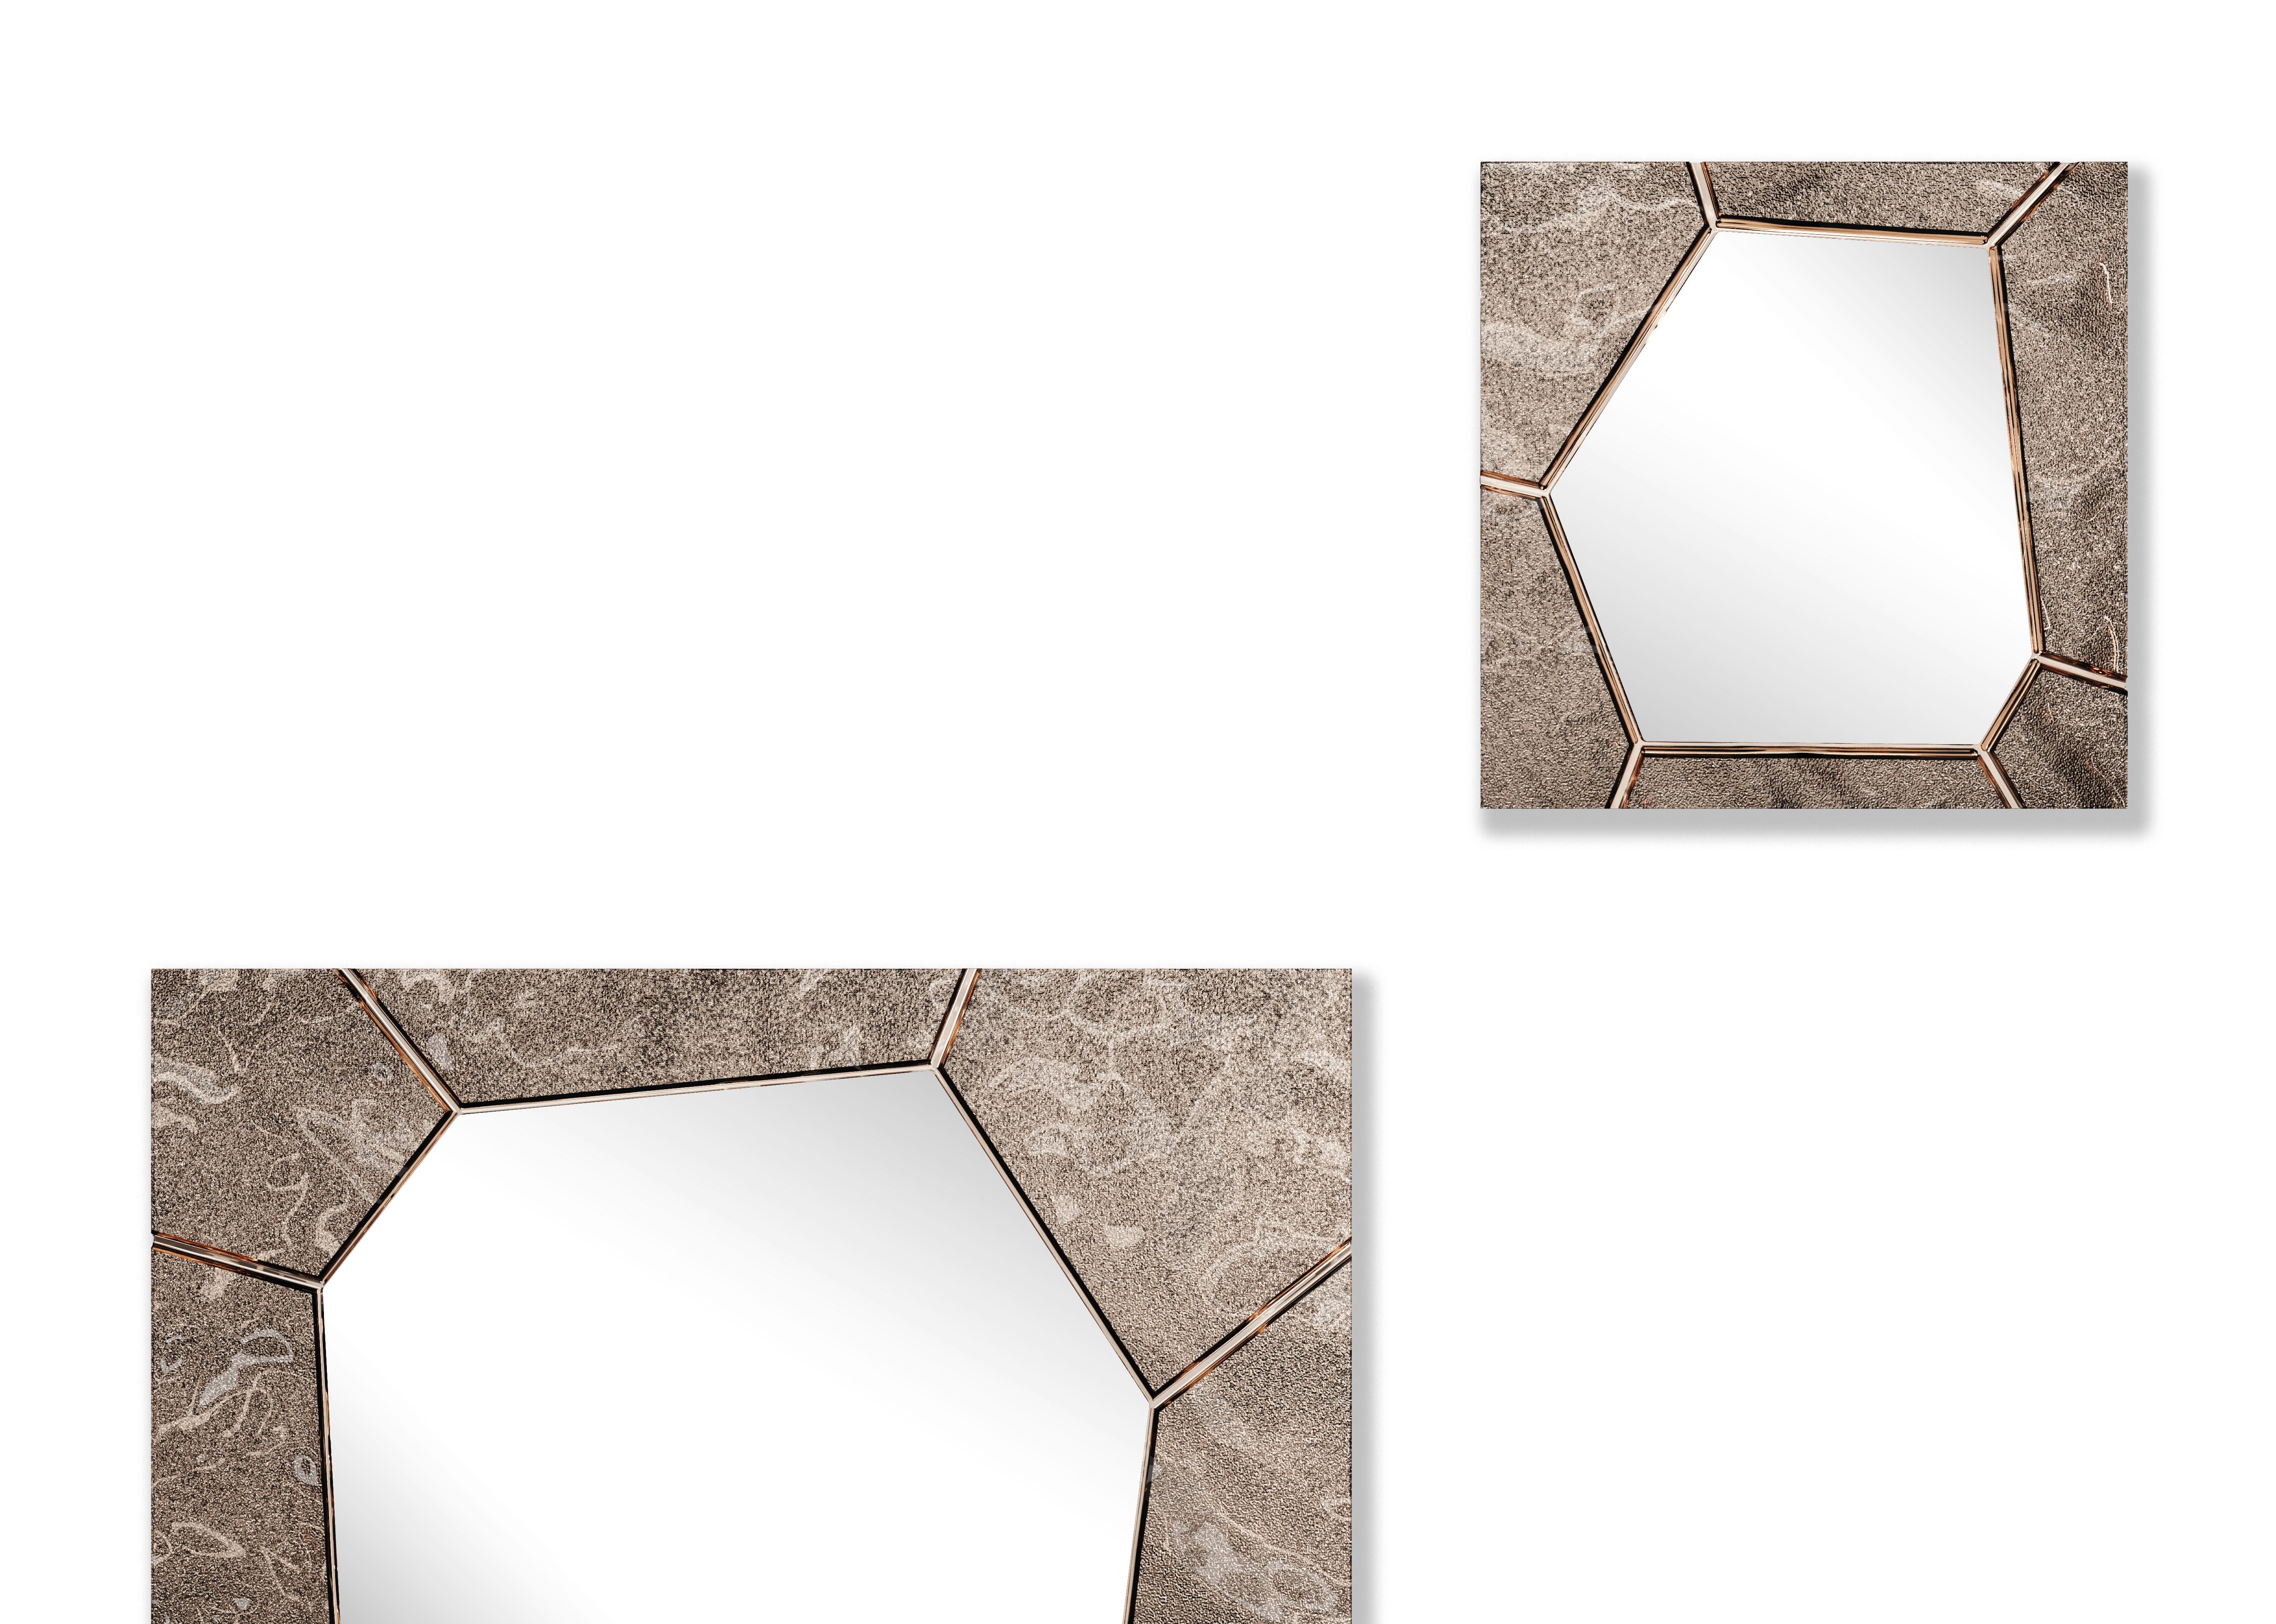 Free-standing
or hanging mirror
with 6 mm-thick
high-temperature
fused and back-
silvered glass frame,
with texture achieved
through a handcrafted
decoration.
5 mm-thick flat mirror.
Painted metal rear
frame. It can be hung
horizontally